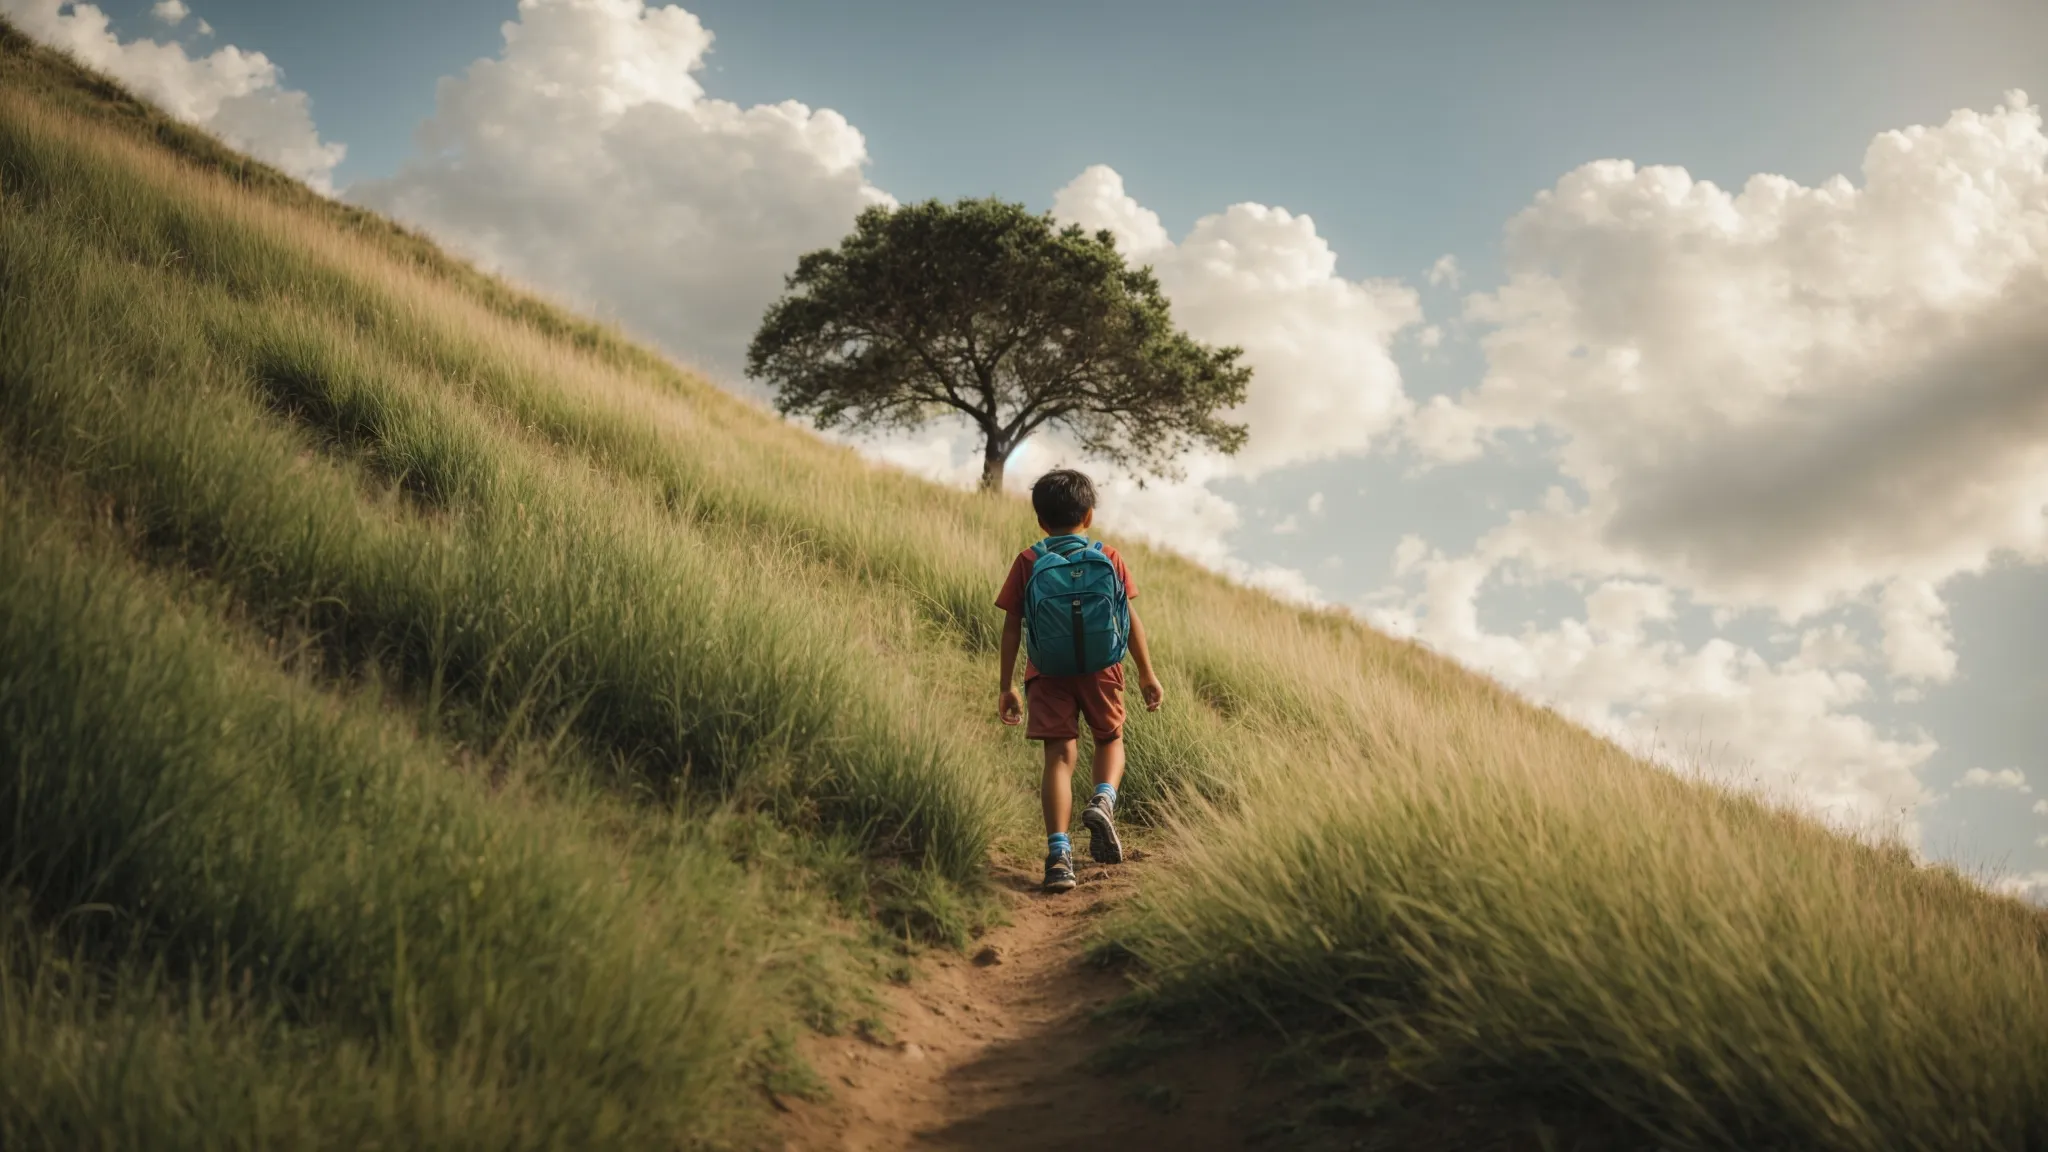 a child climbing a gentle hill under a bright sky, symbolizing the journey of overcoming challenges through persistence and a growth mindset.